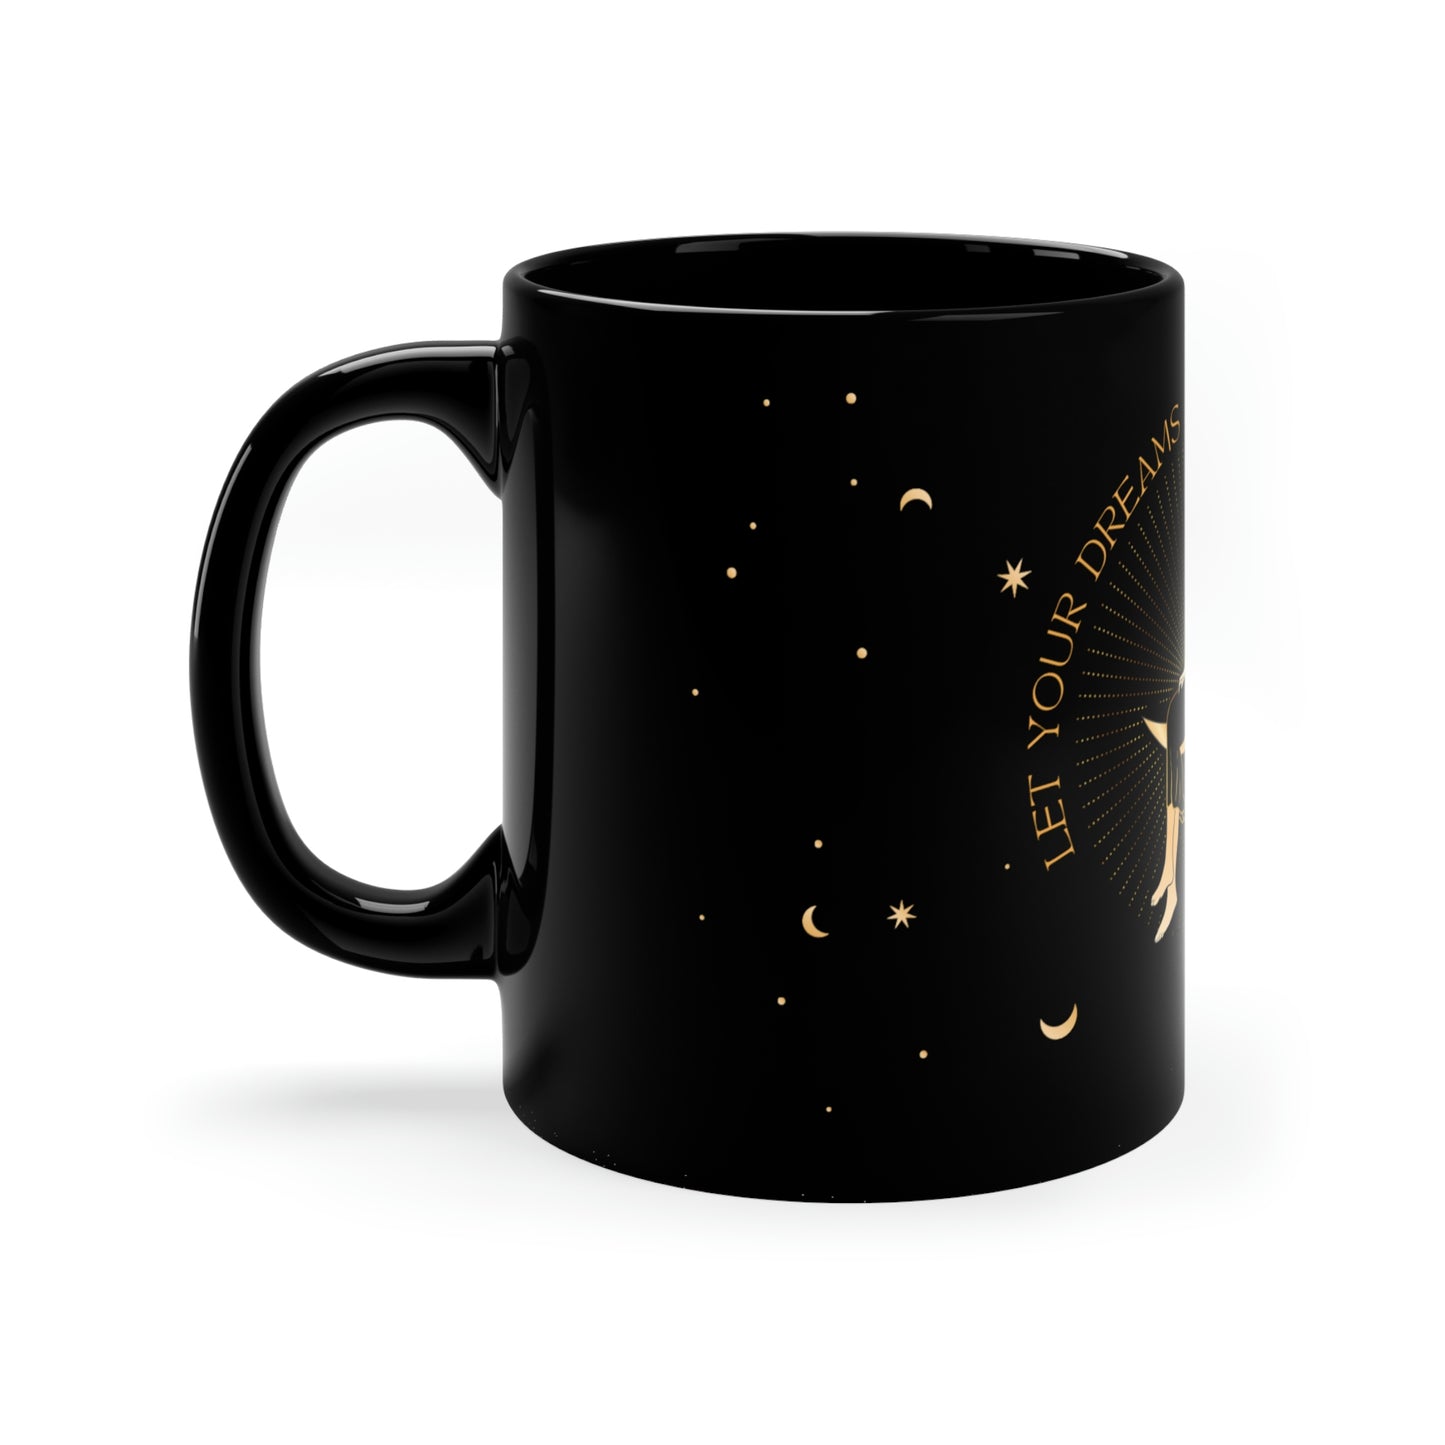 Let Your Dreams Be Your Wings, 11oz Black Mug